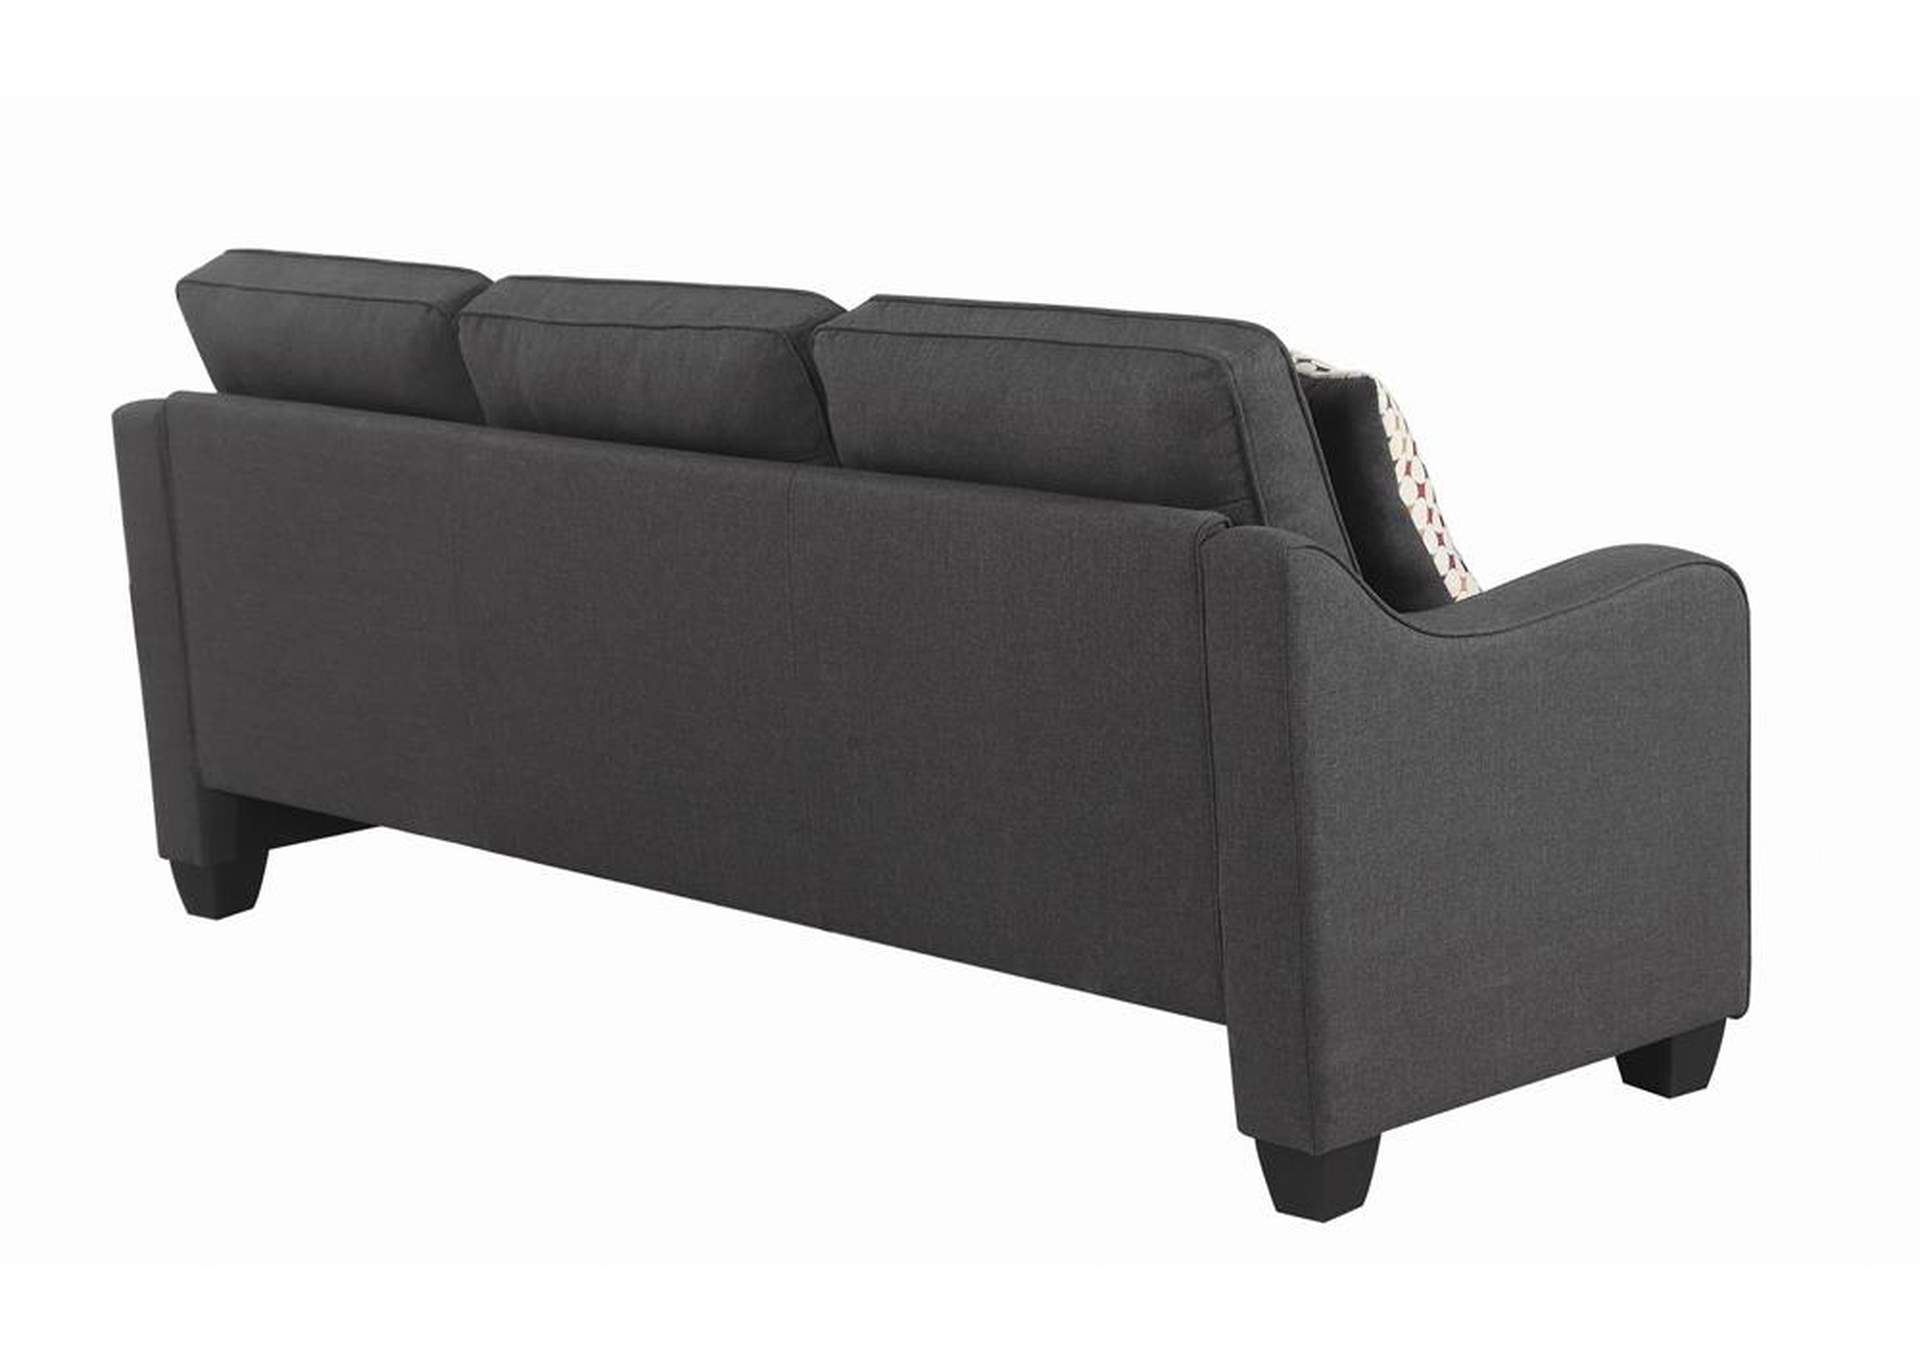 REVERSIBLE SECTIONAL,Coaster Furniture